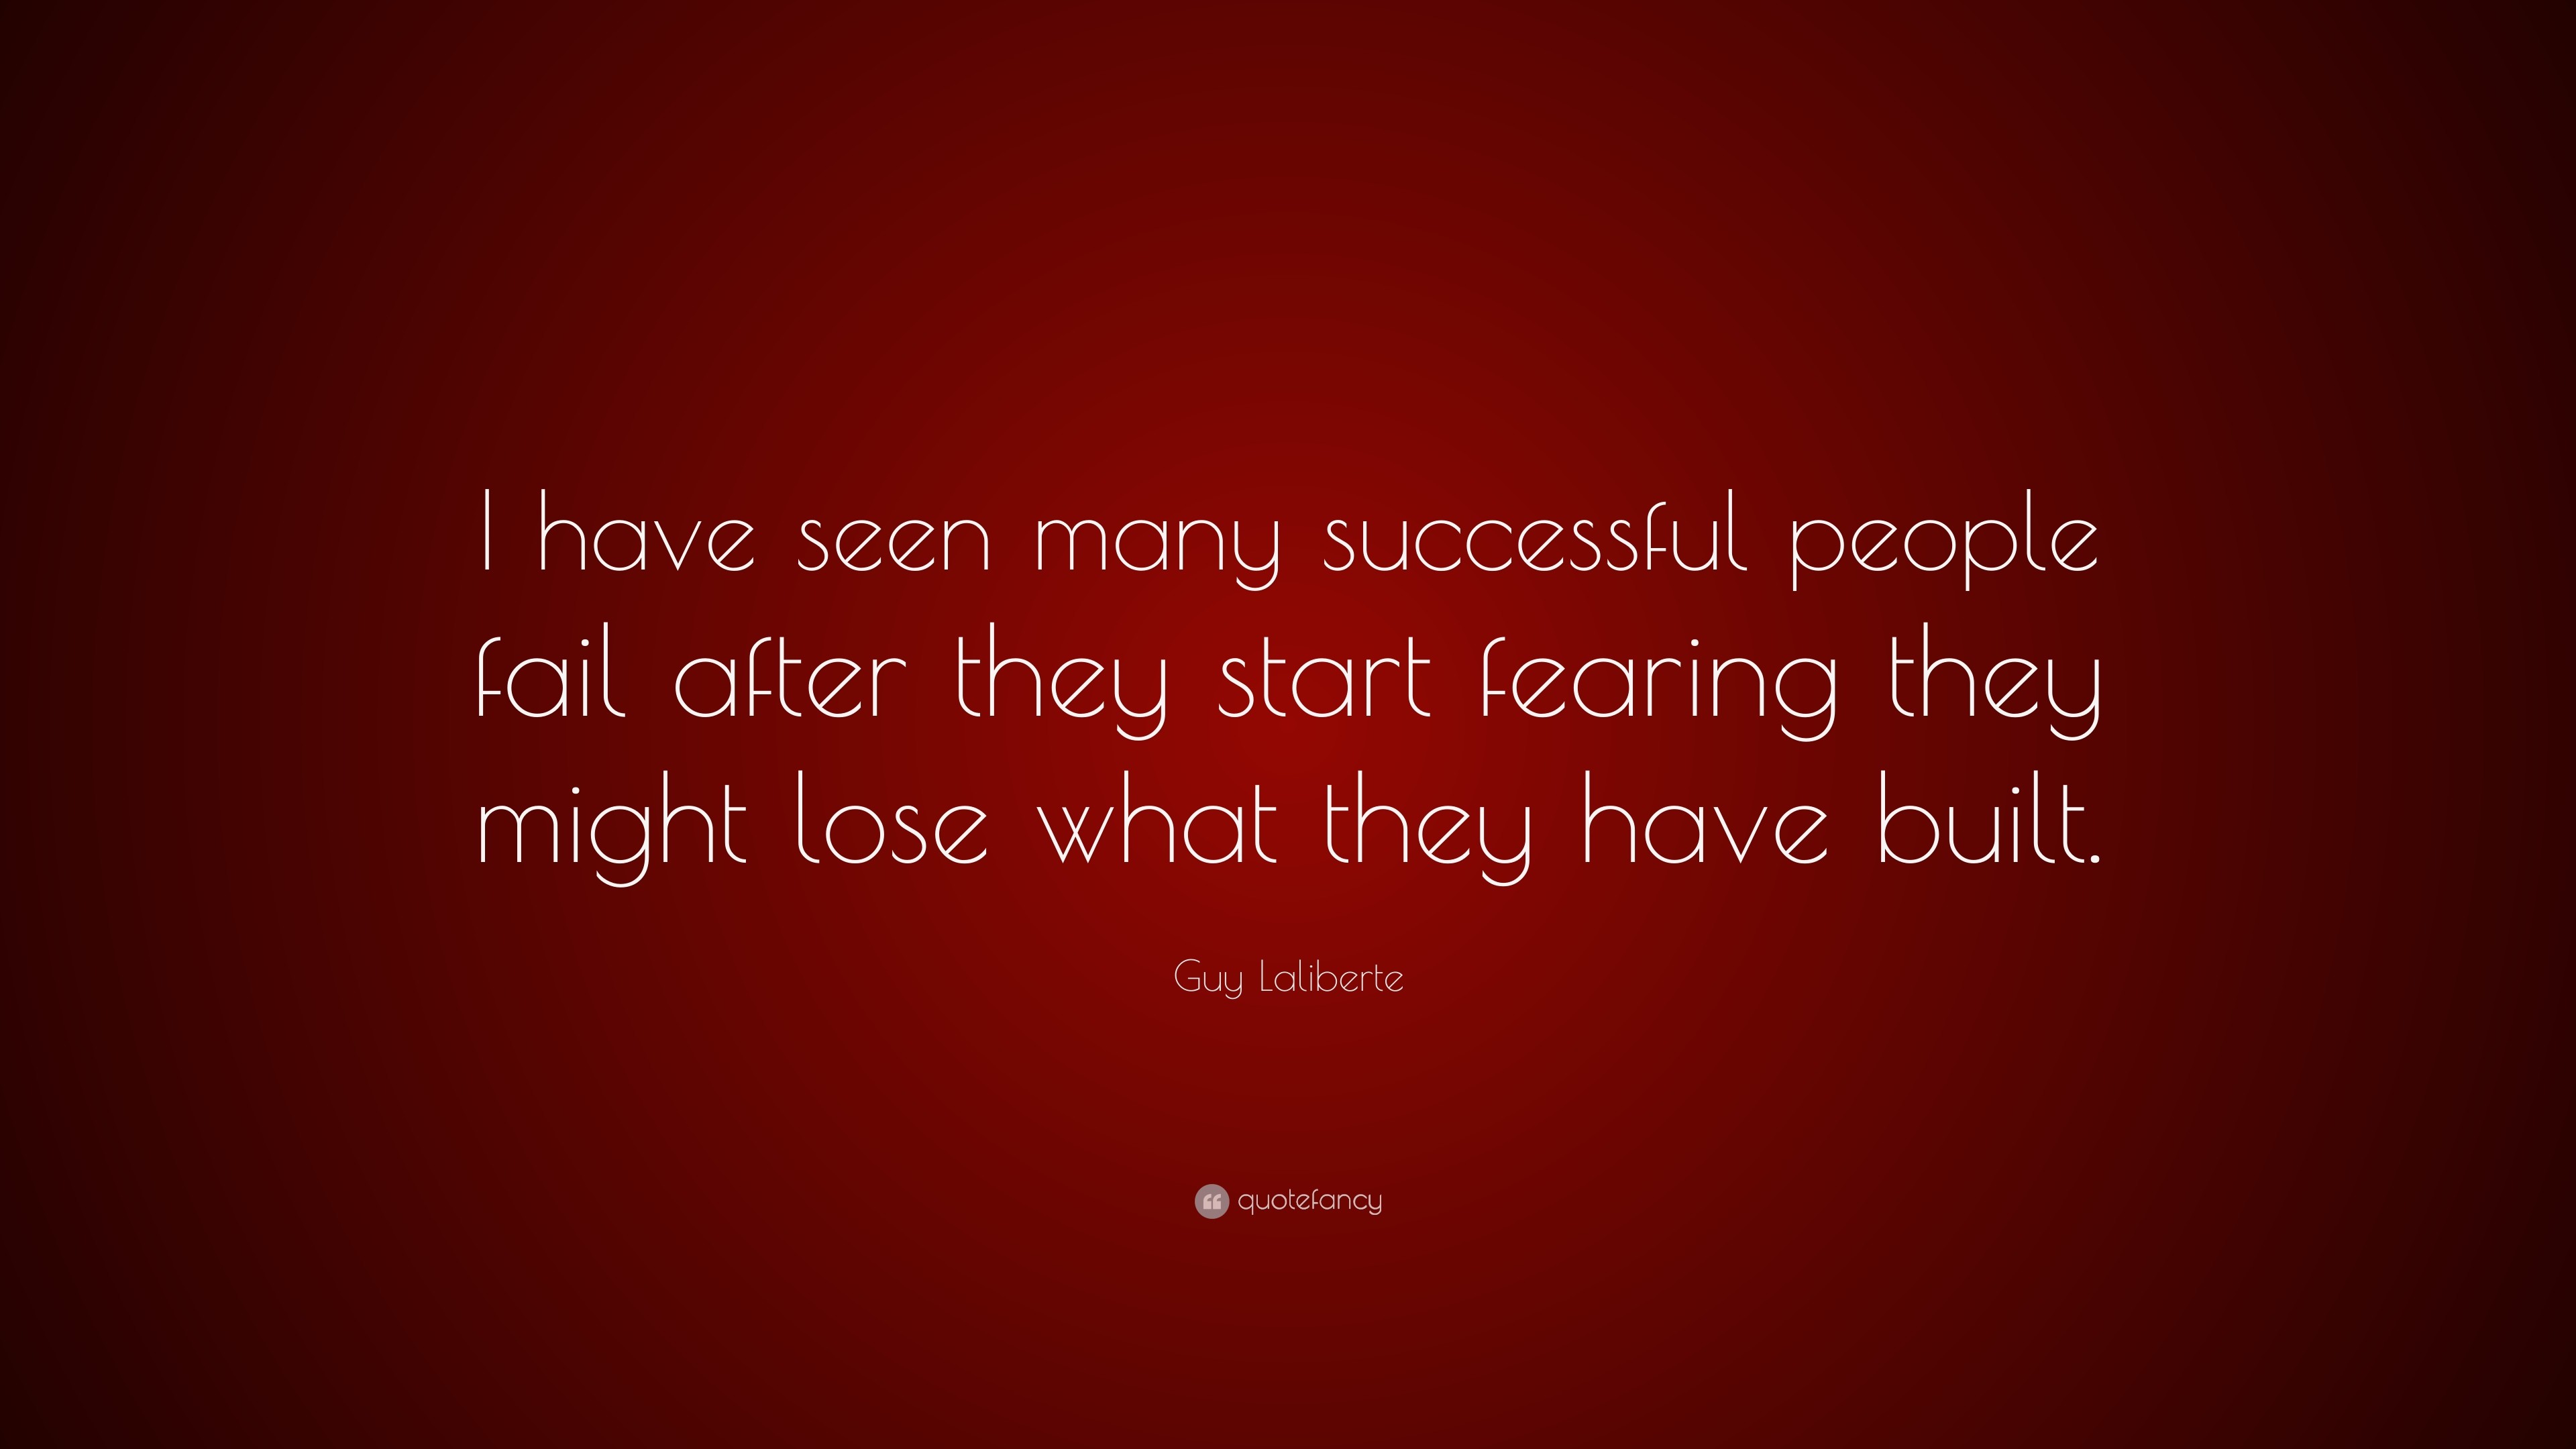 3840x2160 Guy Laliberte Quote: “I have seen many successful people fail after they  start fearing